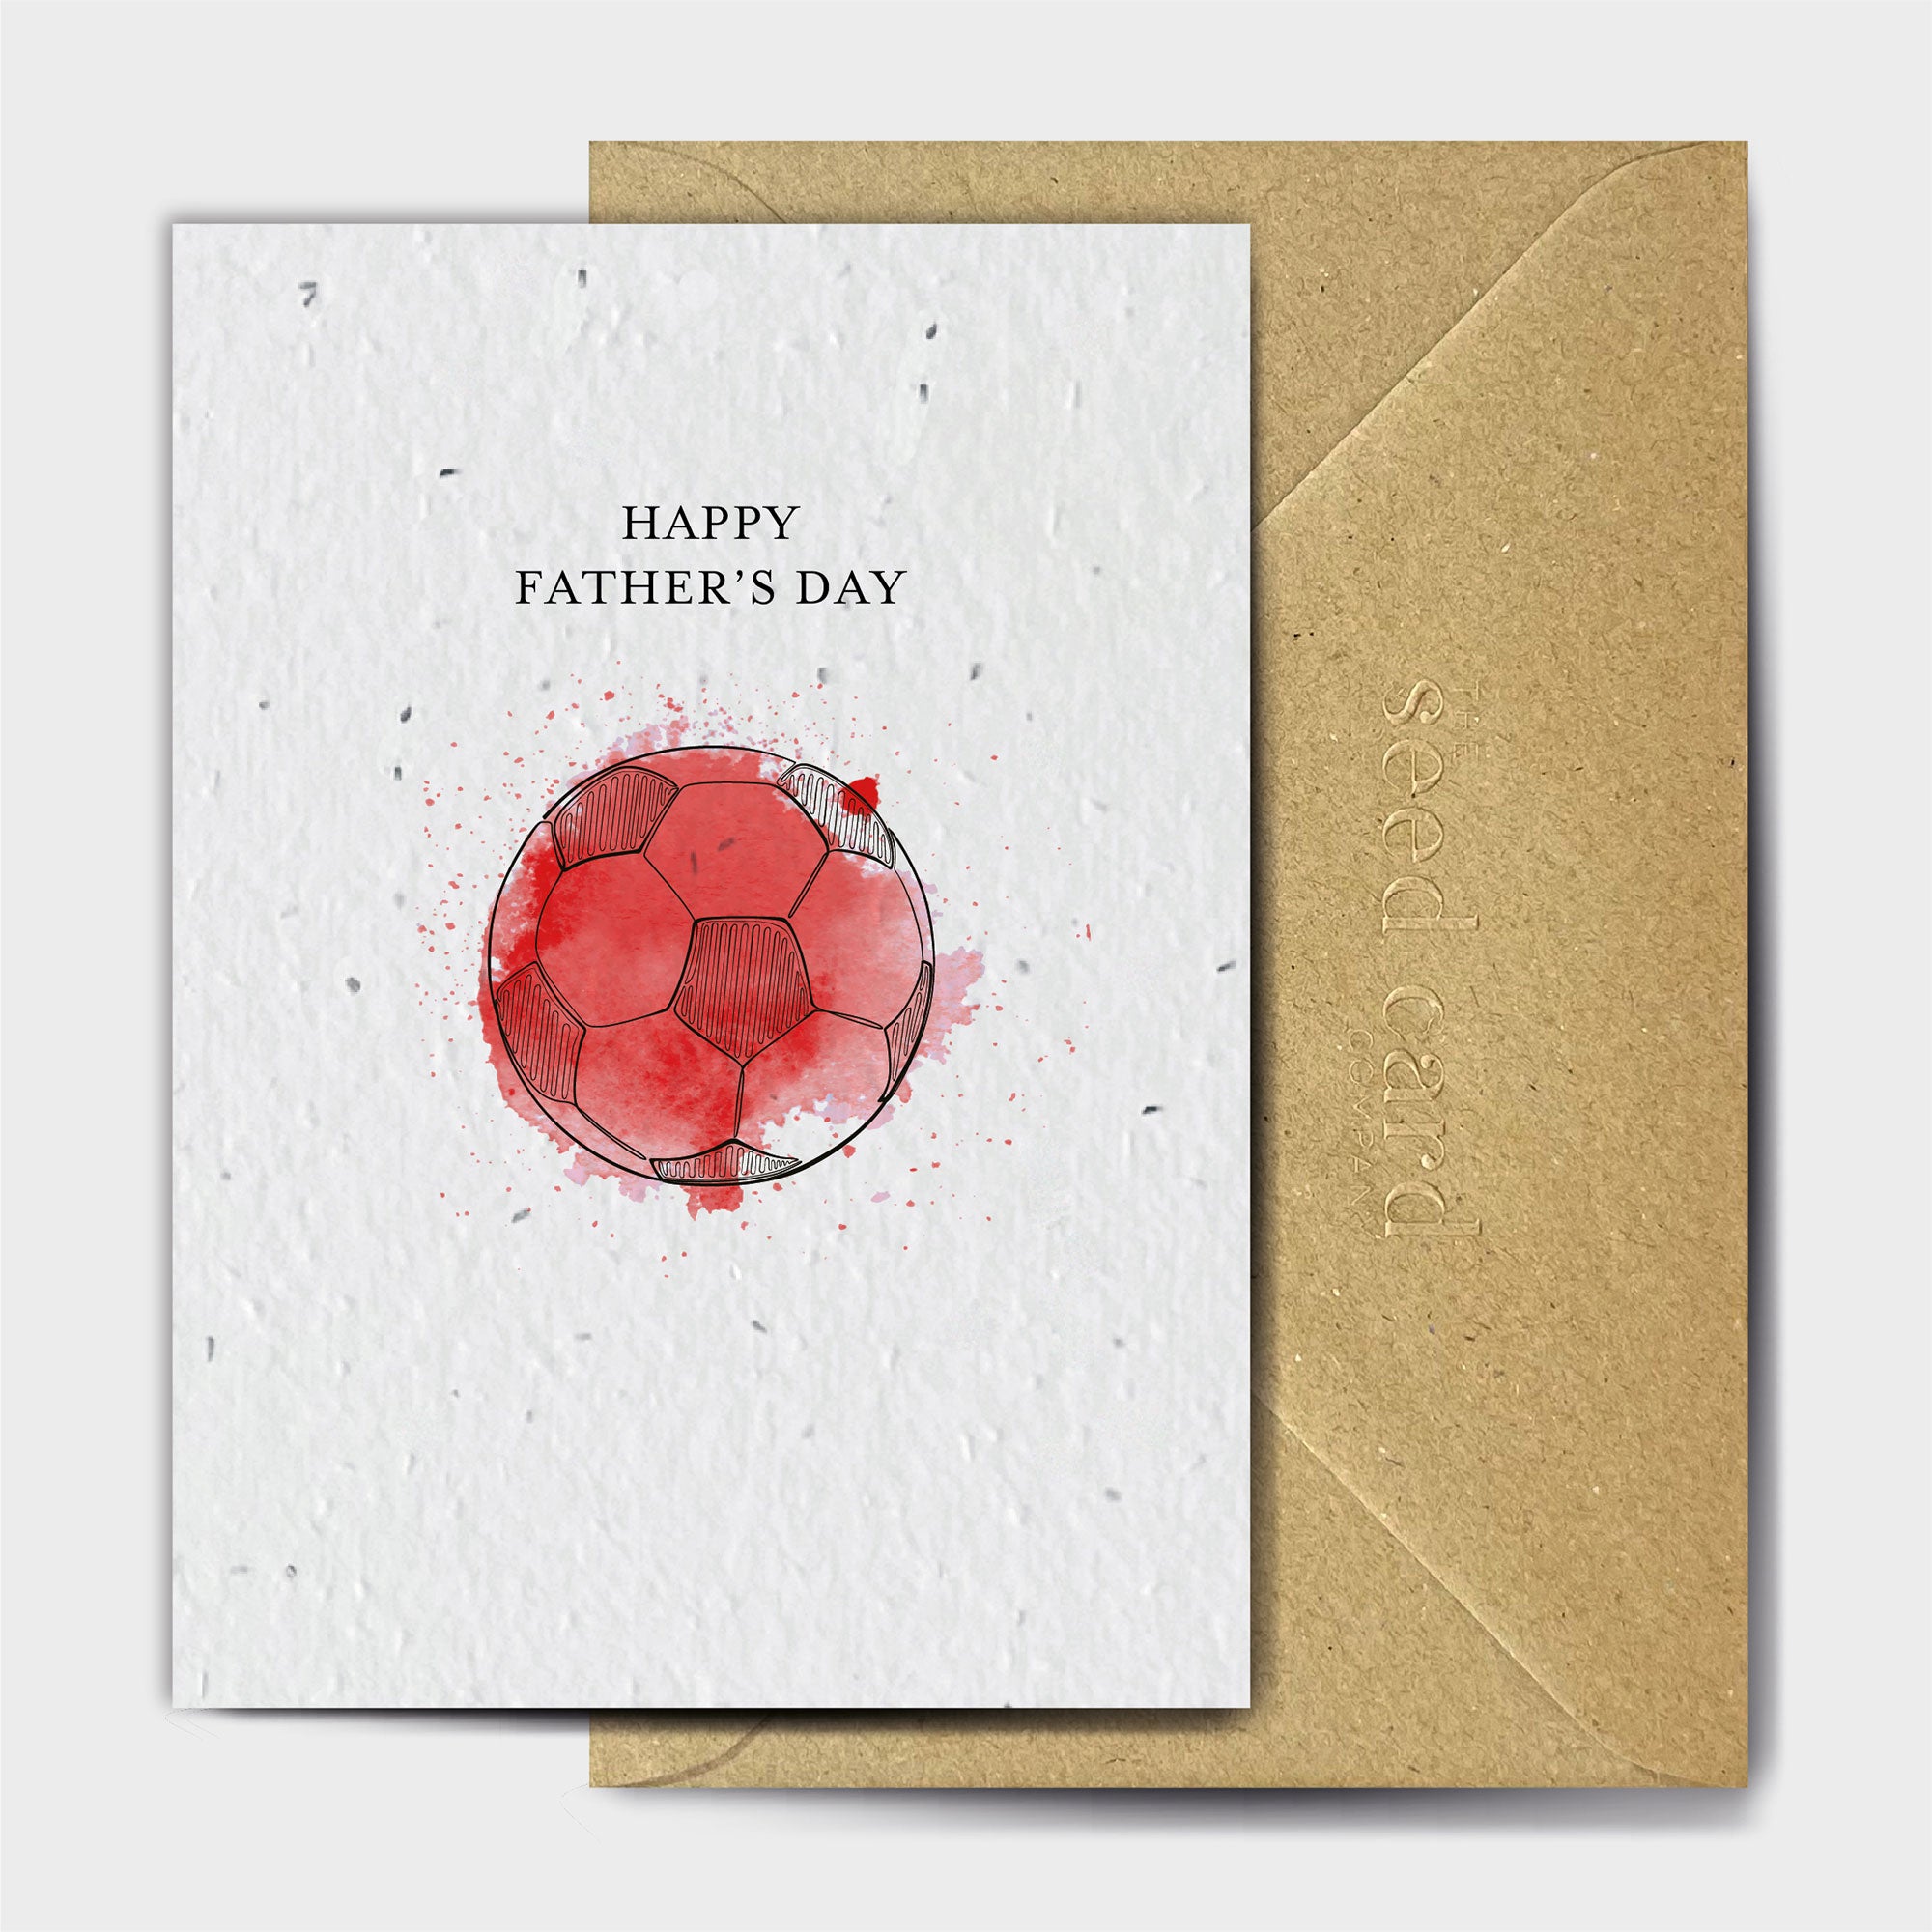 Shop online Father & Son United - 100% biodegradable seed-embedded cards Shop -The Seed Card Company